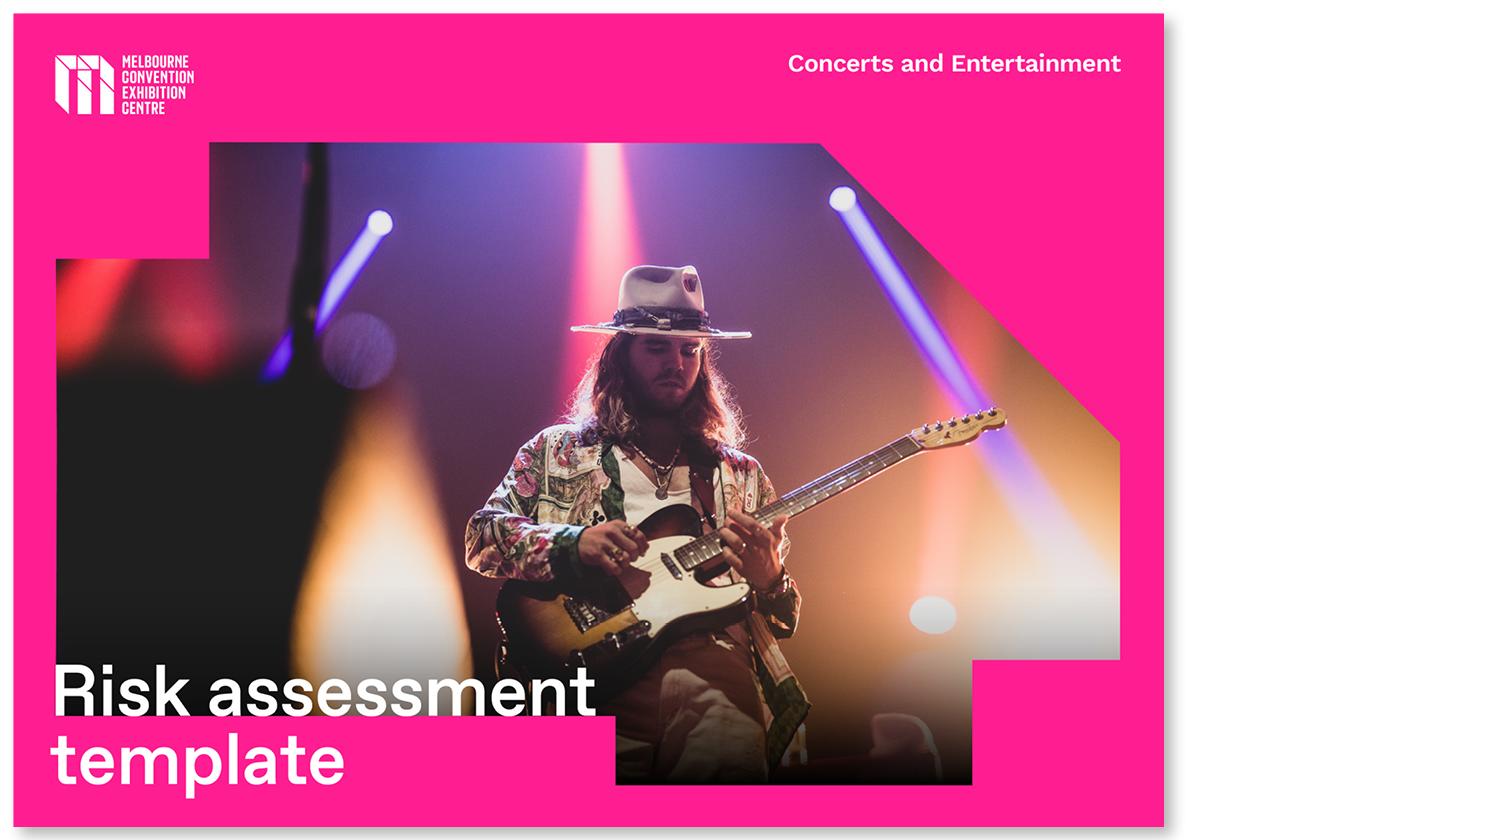 risk-assessment_concerts-entertainment-cover